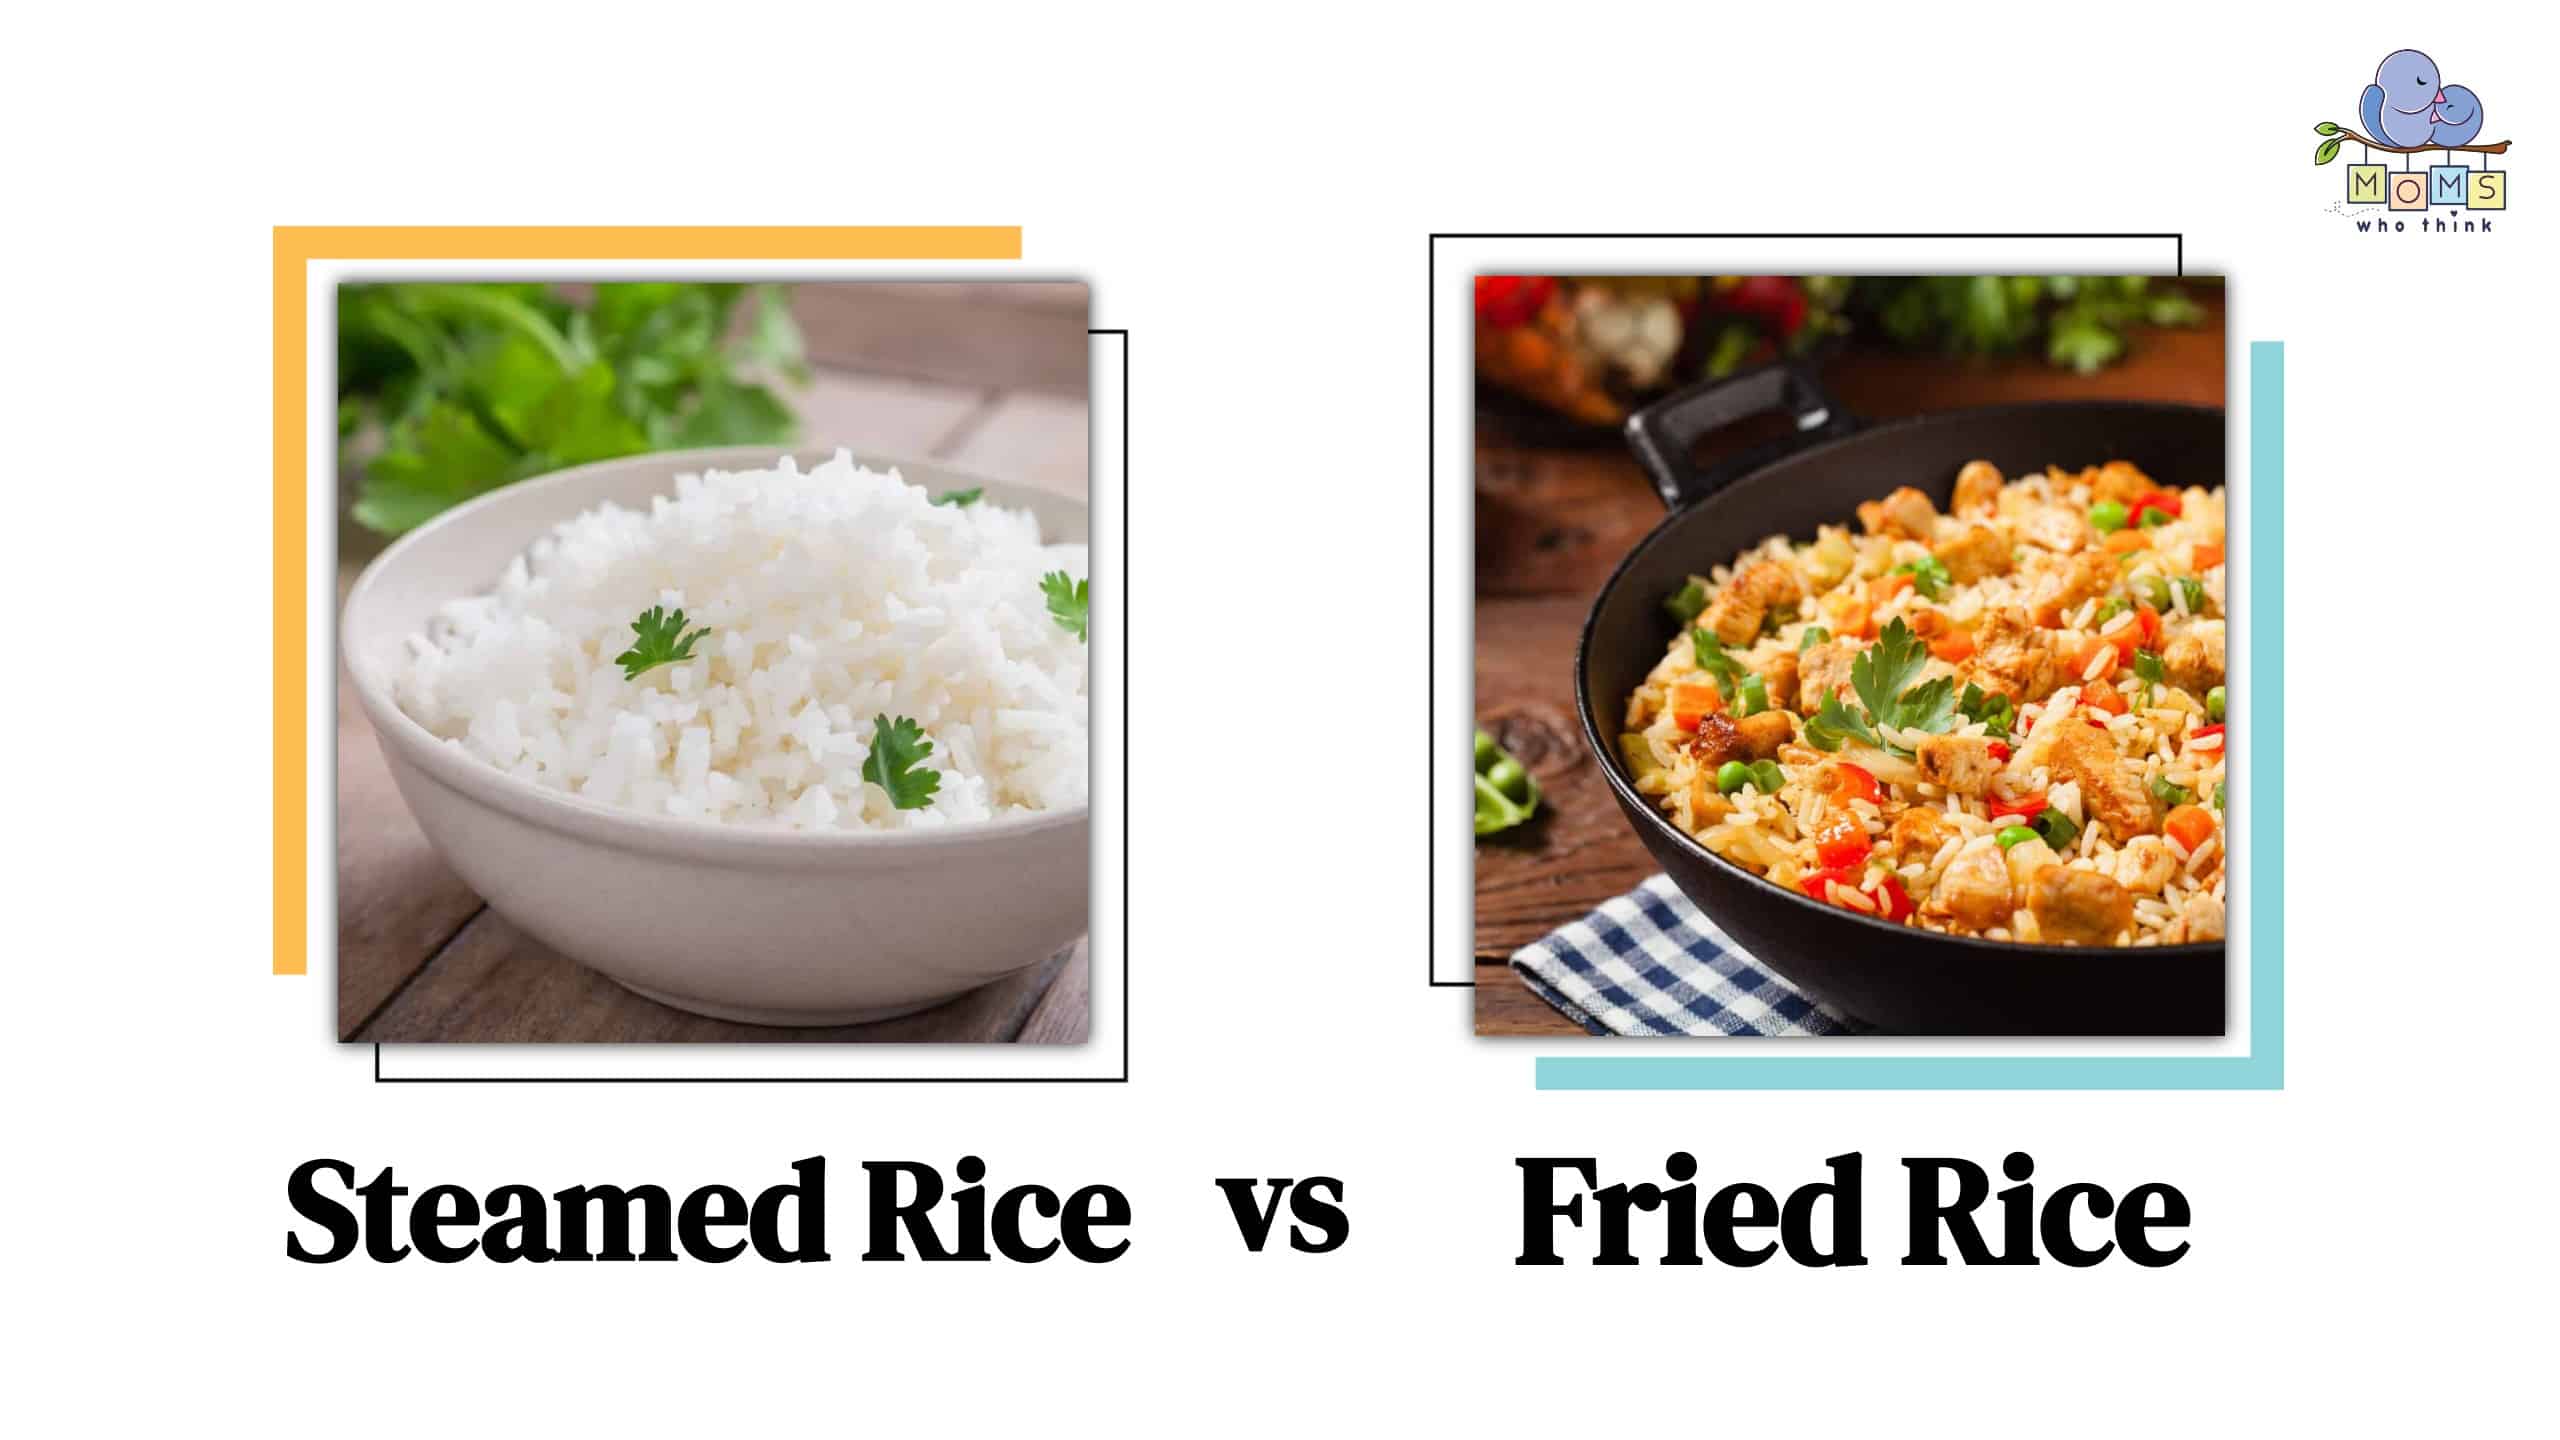 Steamed Rice vs Fried Rice